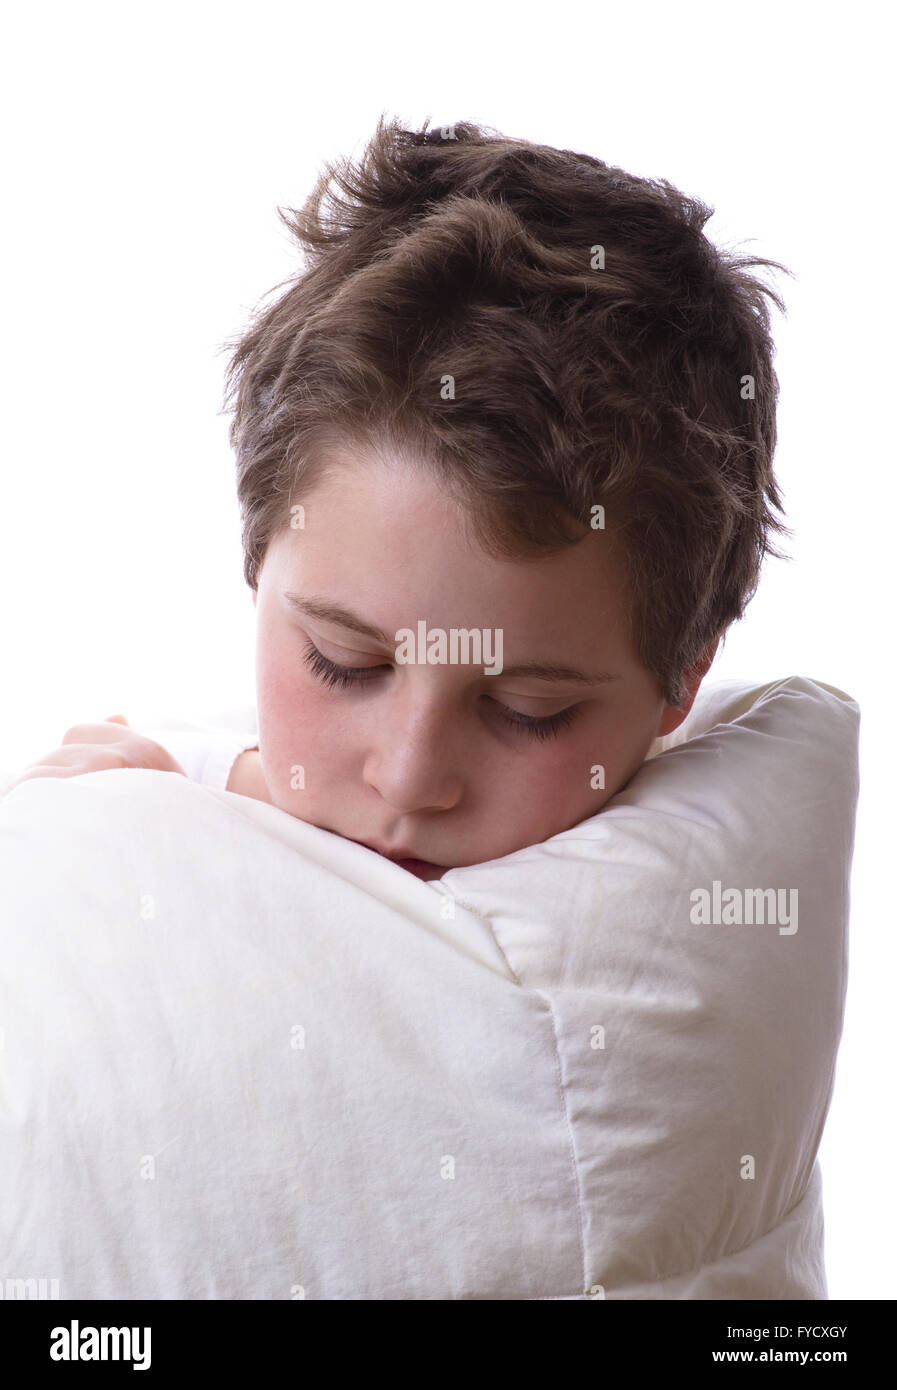 Fever and flu Stock Photo